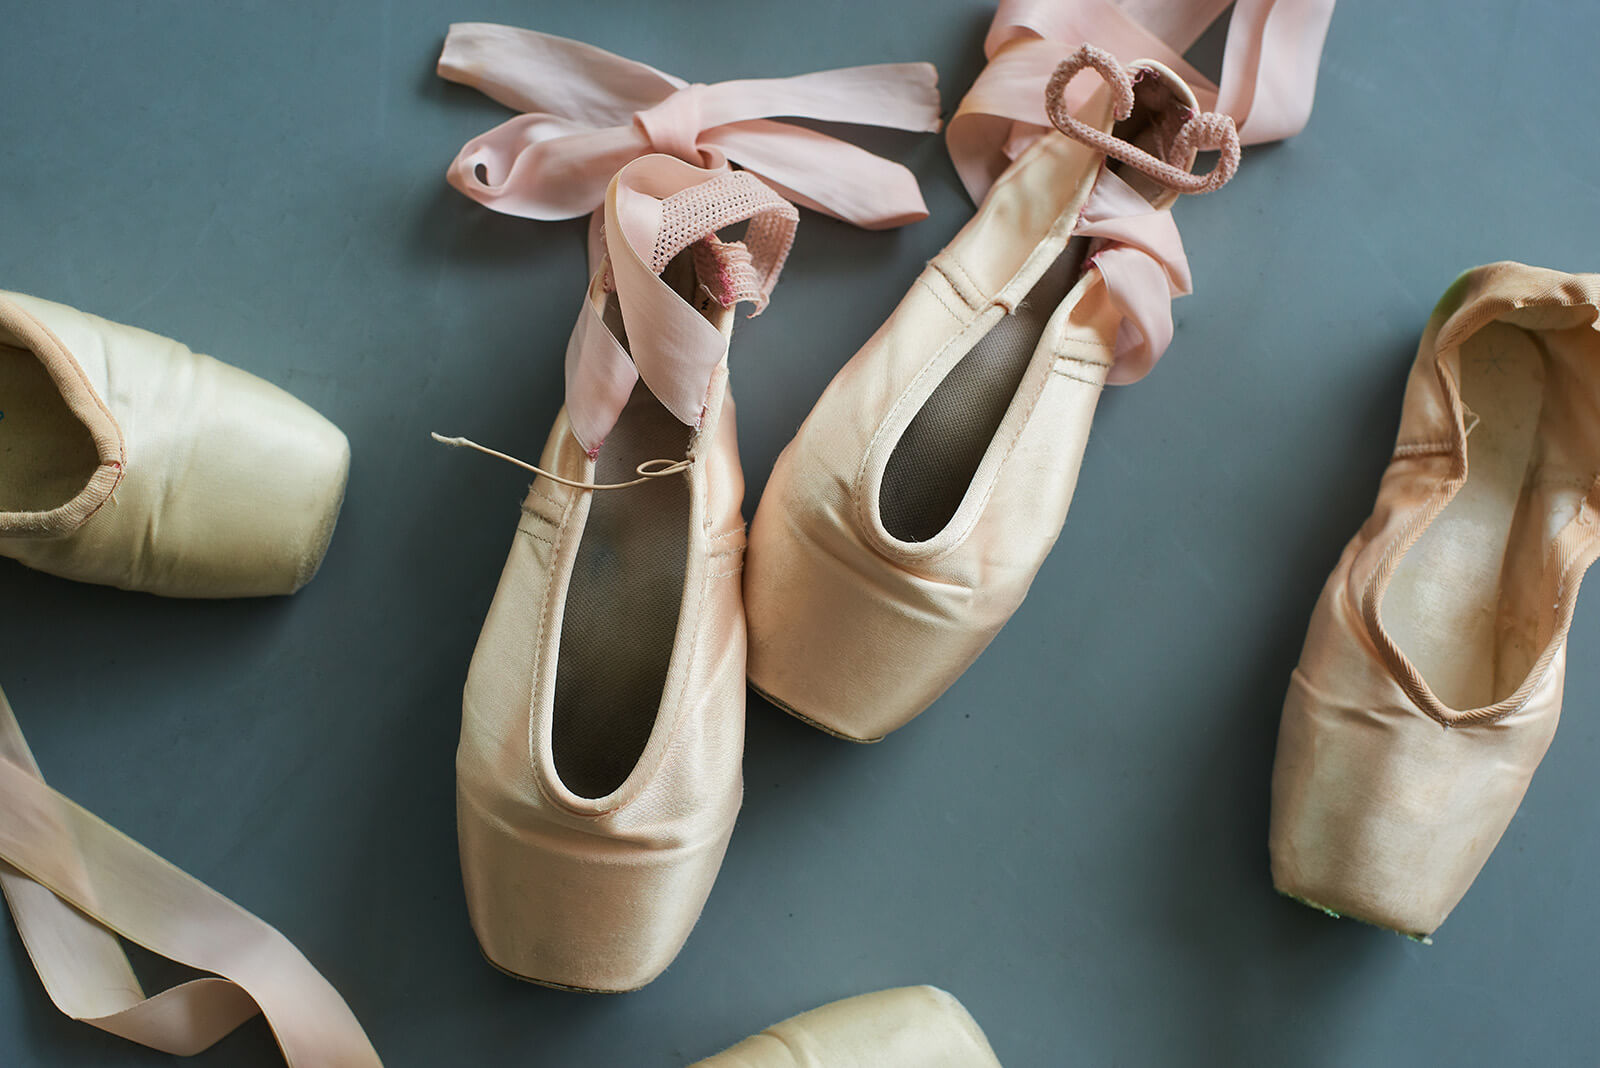 Best Pointe Shoes for Flat Feet